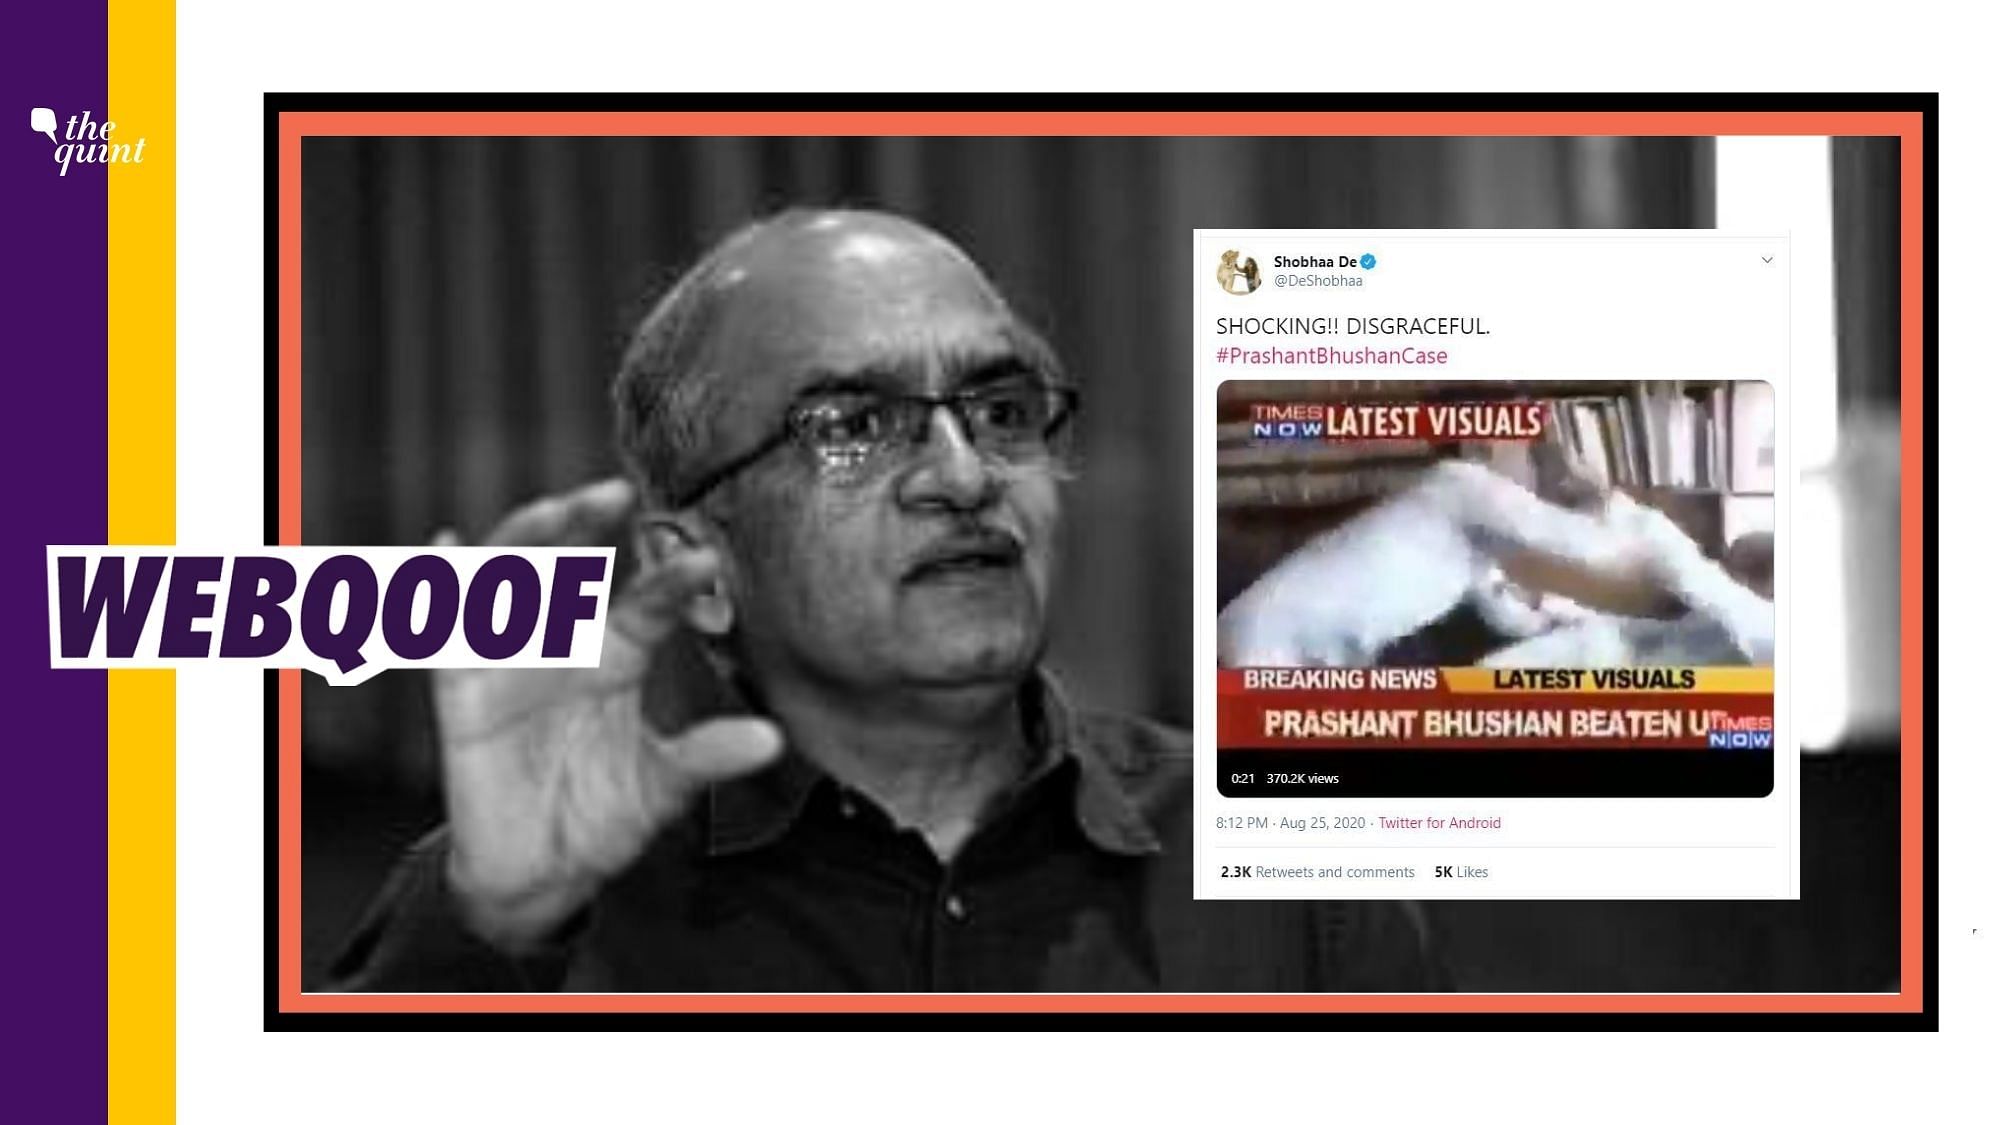 A 2011 video showing Supreme Court lawyer and activist <a href="https://www.thequint.com/topic/prashant-bhushan">Prashant Bhushan</a> is viral again with false claims.